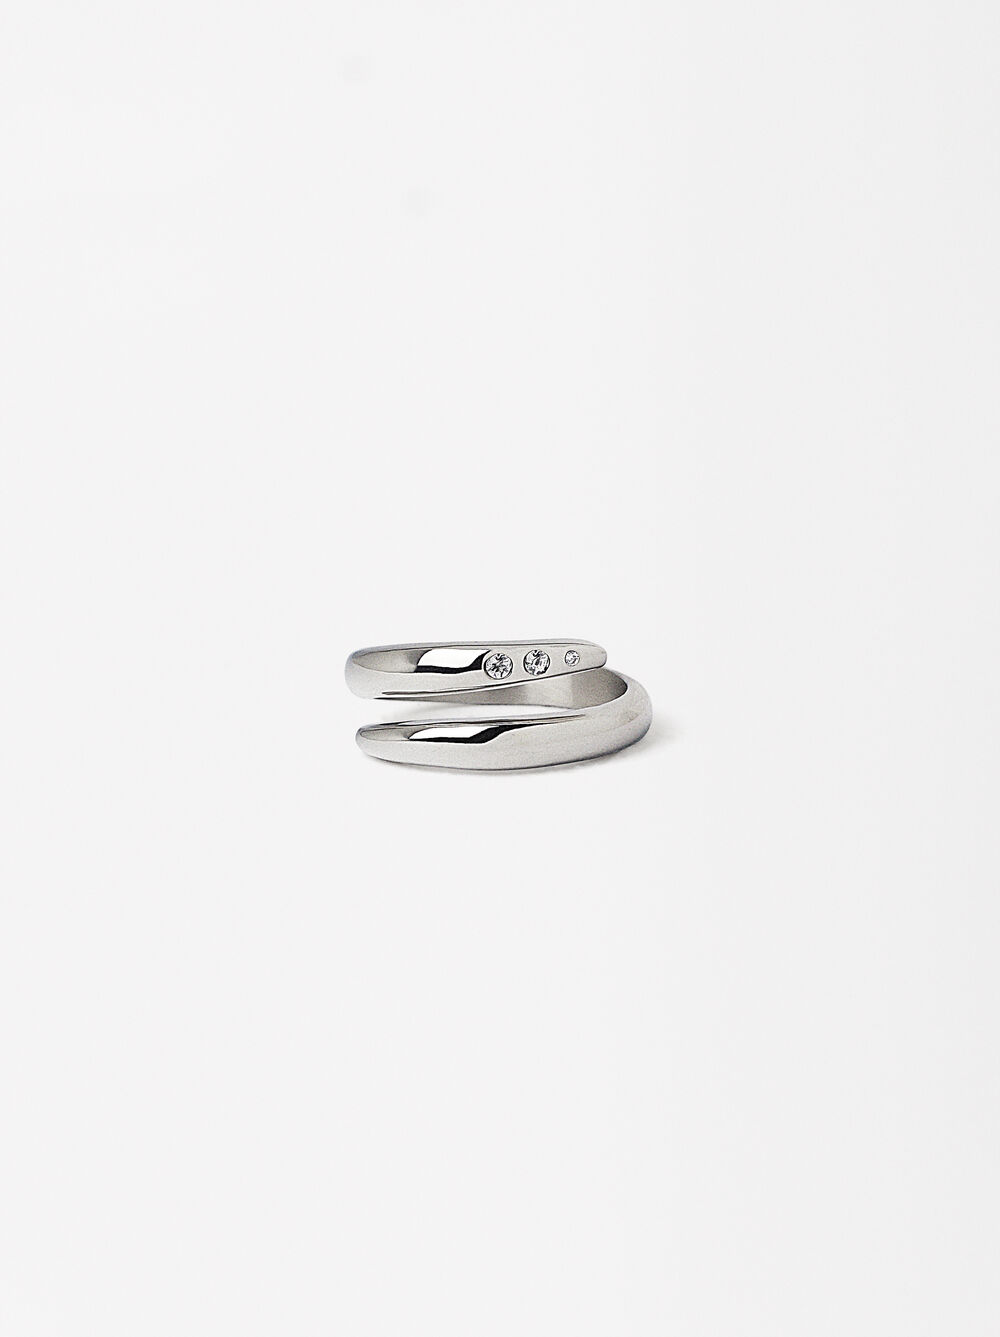 Stainless Steel Ring With Crystals